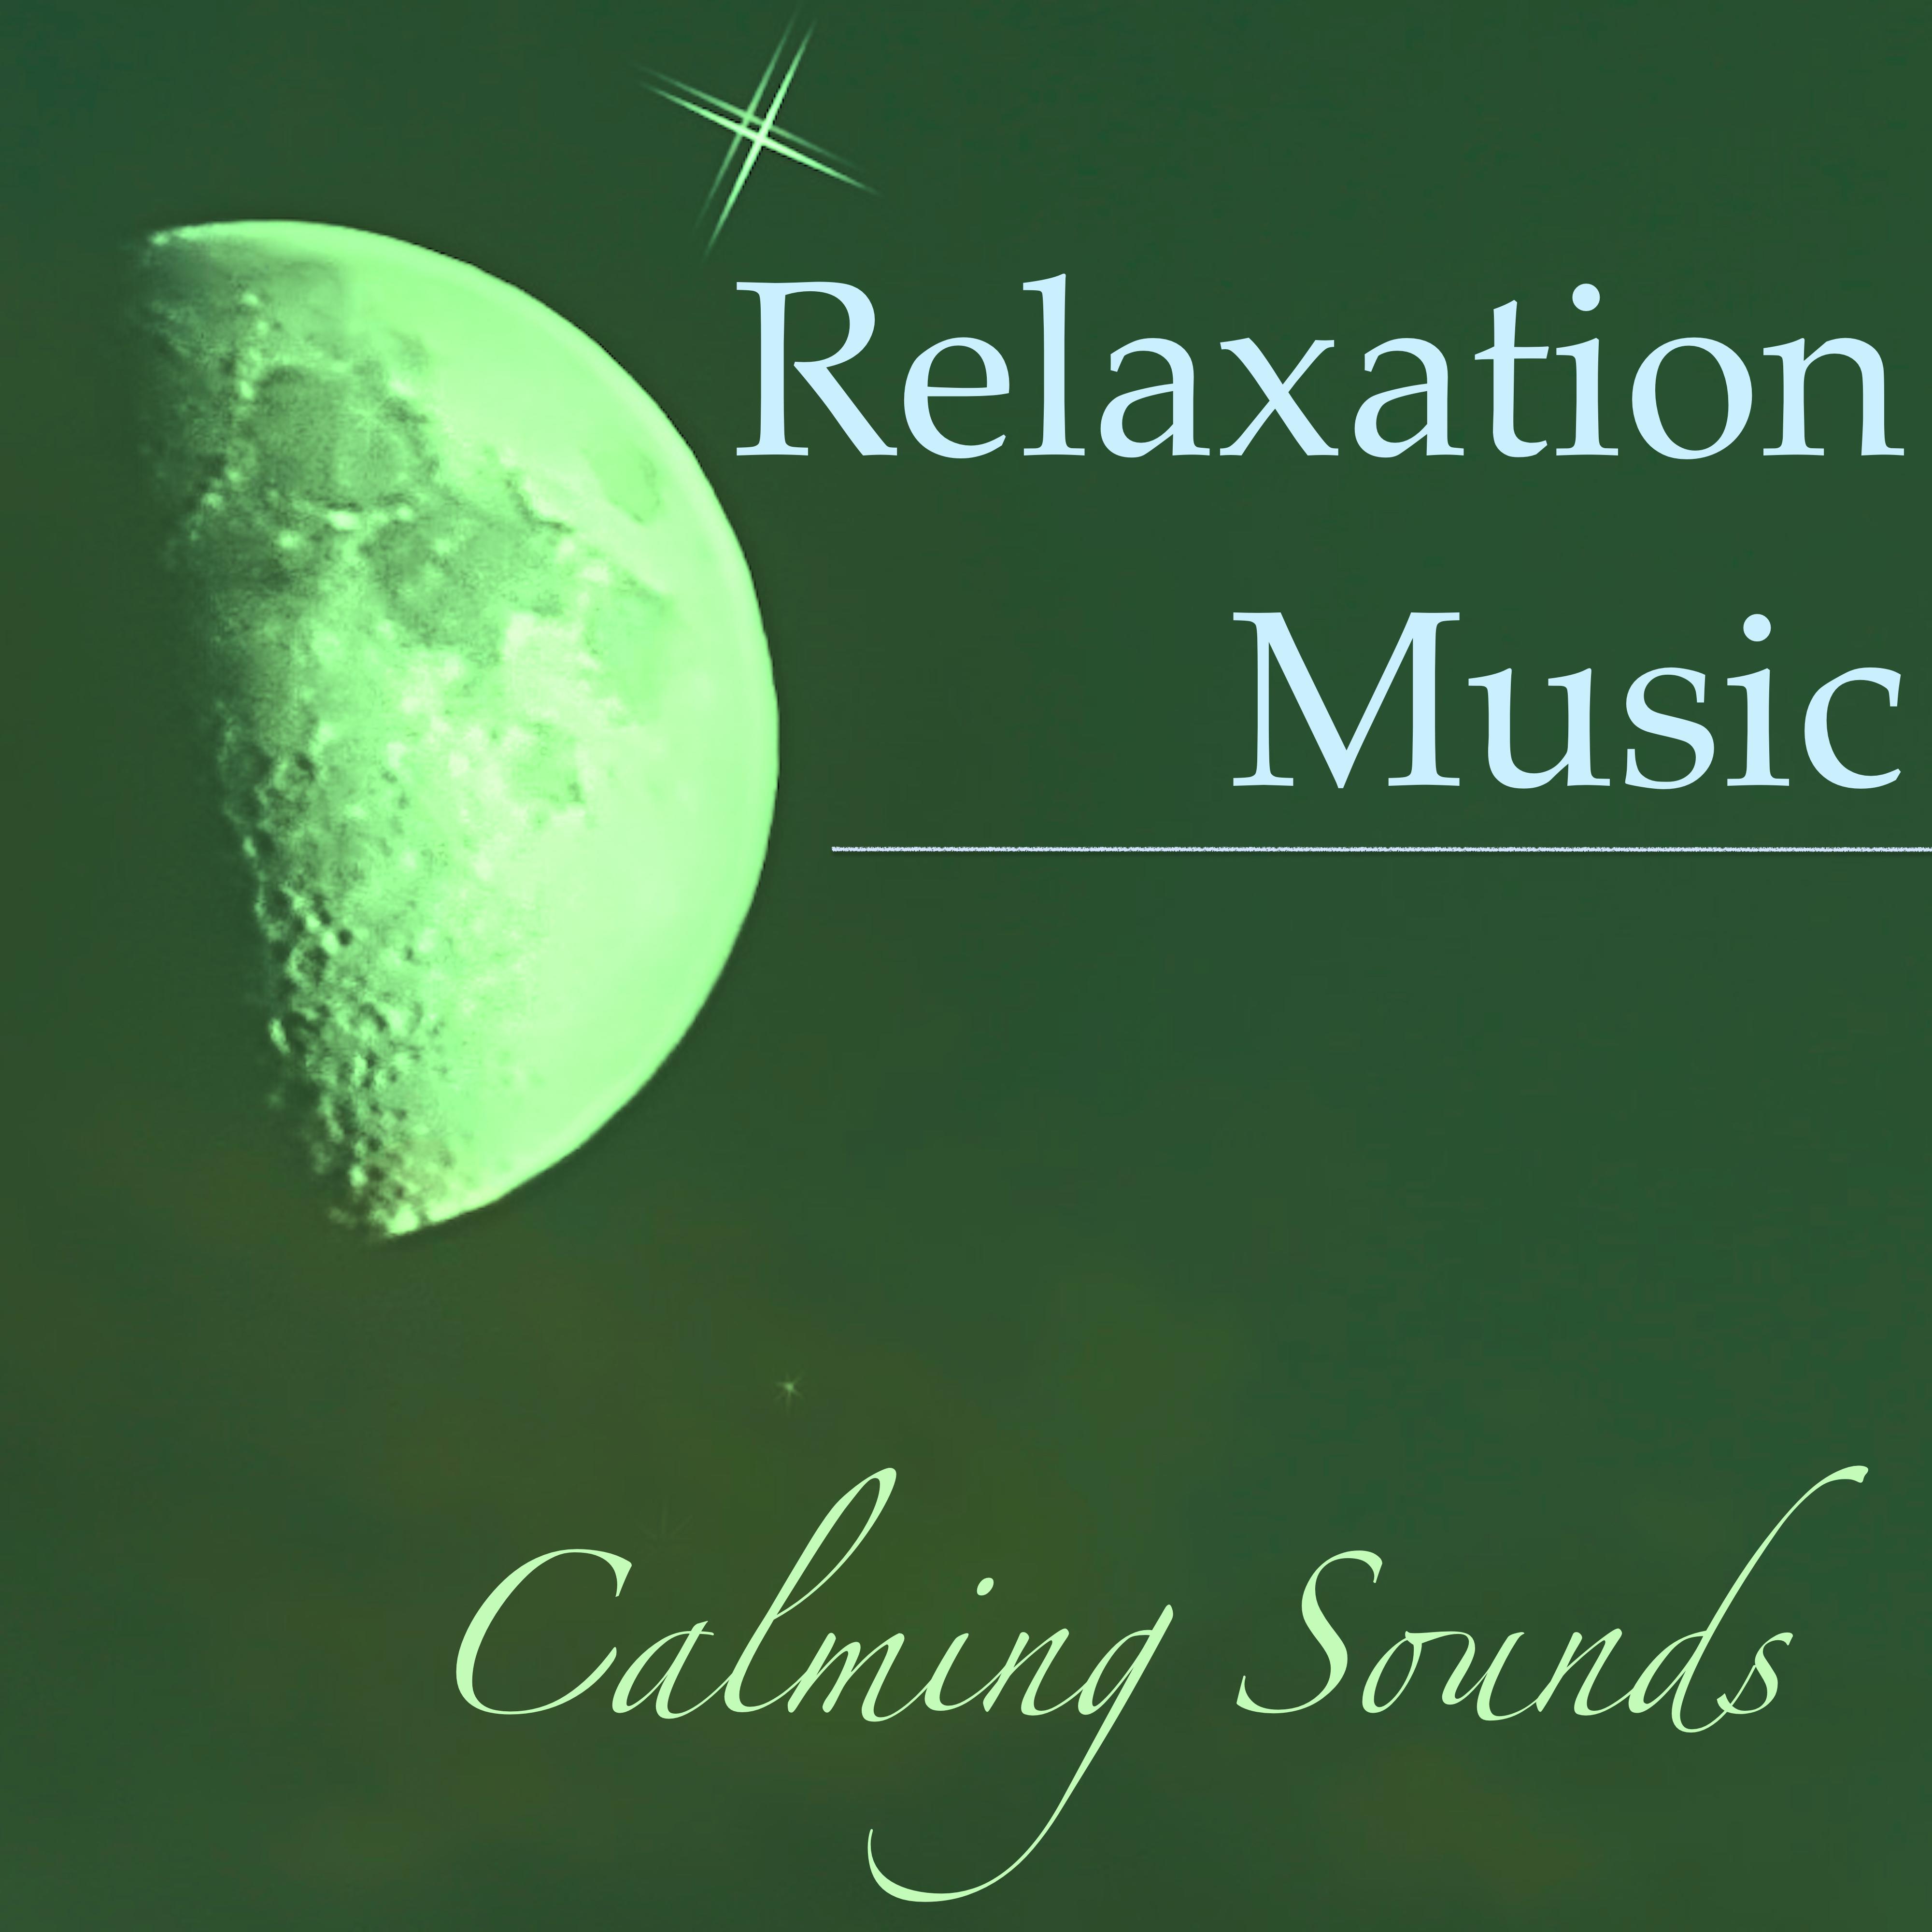 Relaxation Music: Calming Sounds of Nature for Meditation Beginners  Chill Out Music for Reiki, Yoga Morning Salutation  Zen